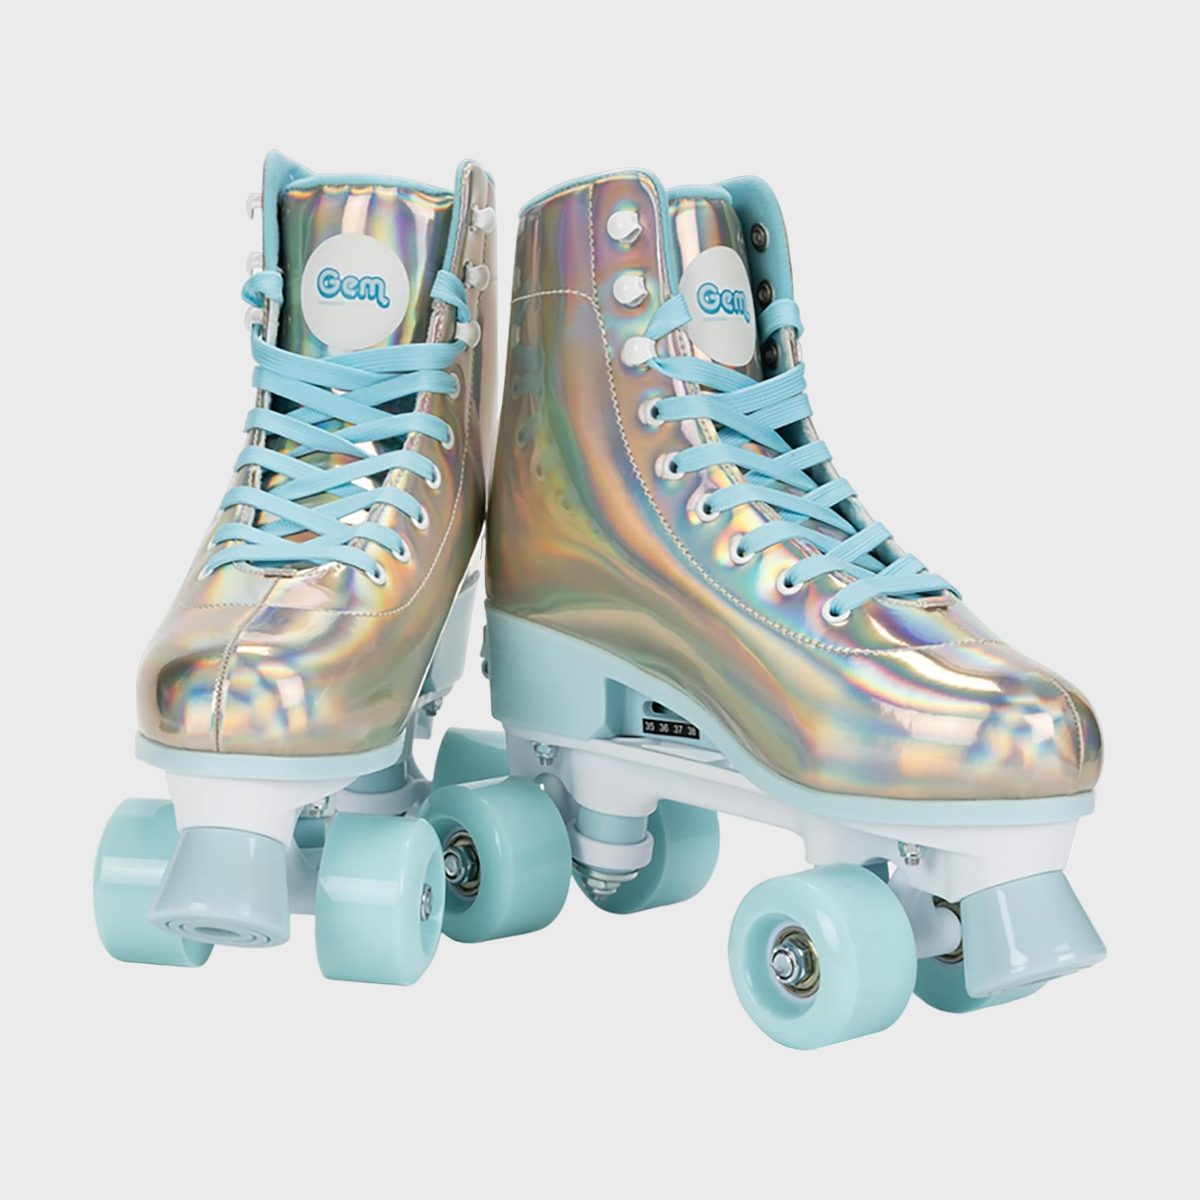 <p>Beginners and pros alike will love these <a href="https://www.amazon.com/dp/B07KXTKCHZ" rel="noopener noreferrer">retro roller skates</a>. These lace-up skates feature size adjustable boots, five-speed bearings and an attached stopper. They even come with a handy carrying strap and are offered in a variety of colors including fun holographic options.</p> <p>Be sure to pack these <a href="https://www.rd.com/list/vintage-candies/" rel="noopener noreferrer">vintage candies</a> for your next trip to the roller rink. These gifts for girls will make her the envy of the neighborhood.</p> <p class="listicle-page__cta-button-shop"><a class="shop-btn" href="https://www.amazon.com/dp/B07KXTKCHZ">Shop Now</a></p>